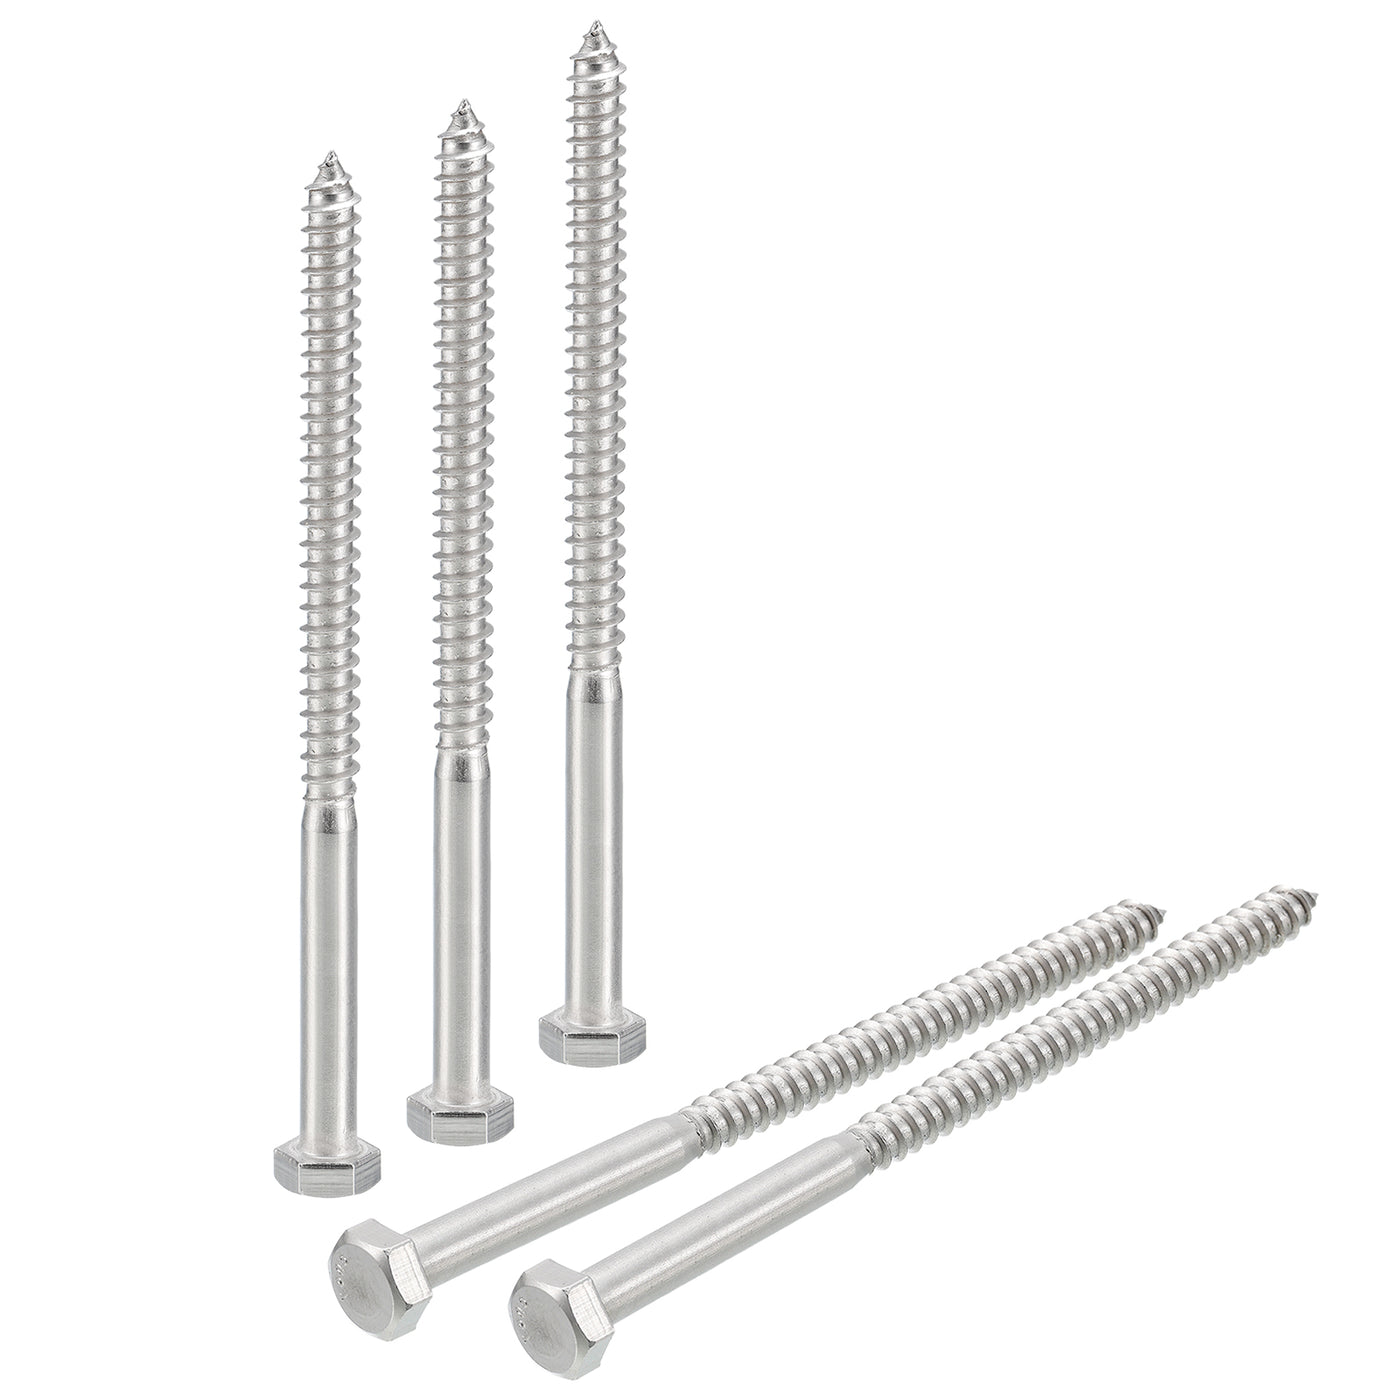 uxcell Uxcell Hex Head Lag Screws Bolts, 5pcs 5/16" x 5" 304 Stainless Steel Wood Screws